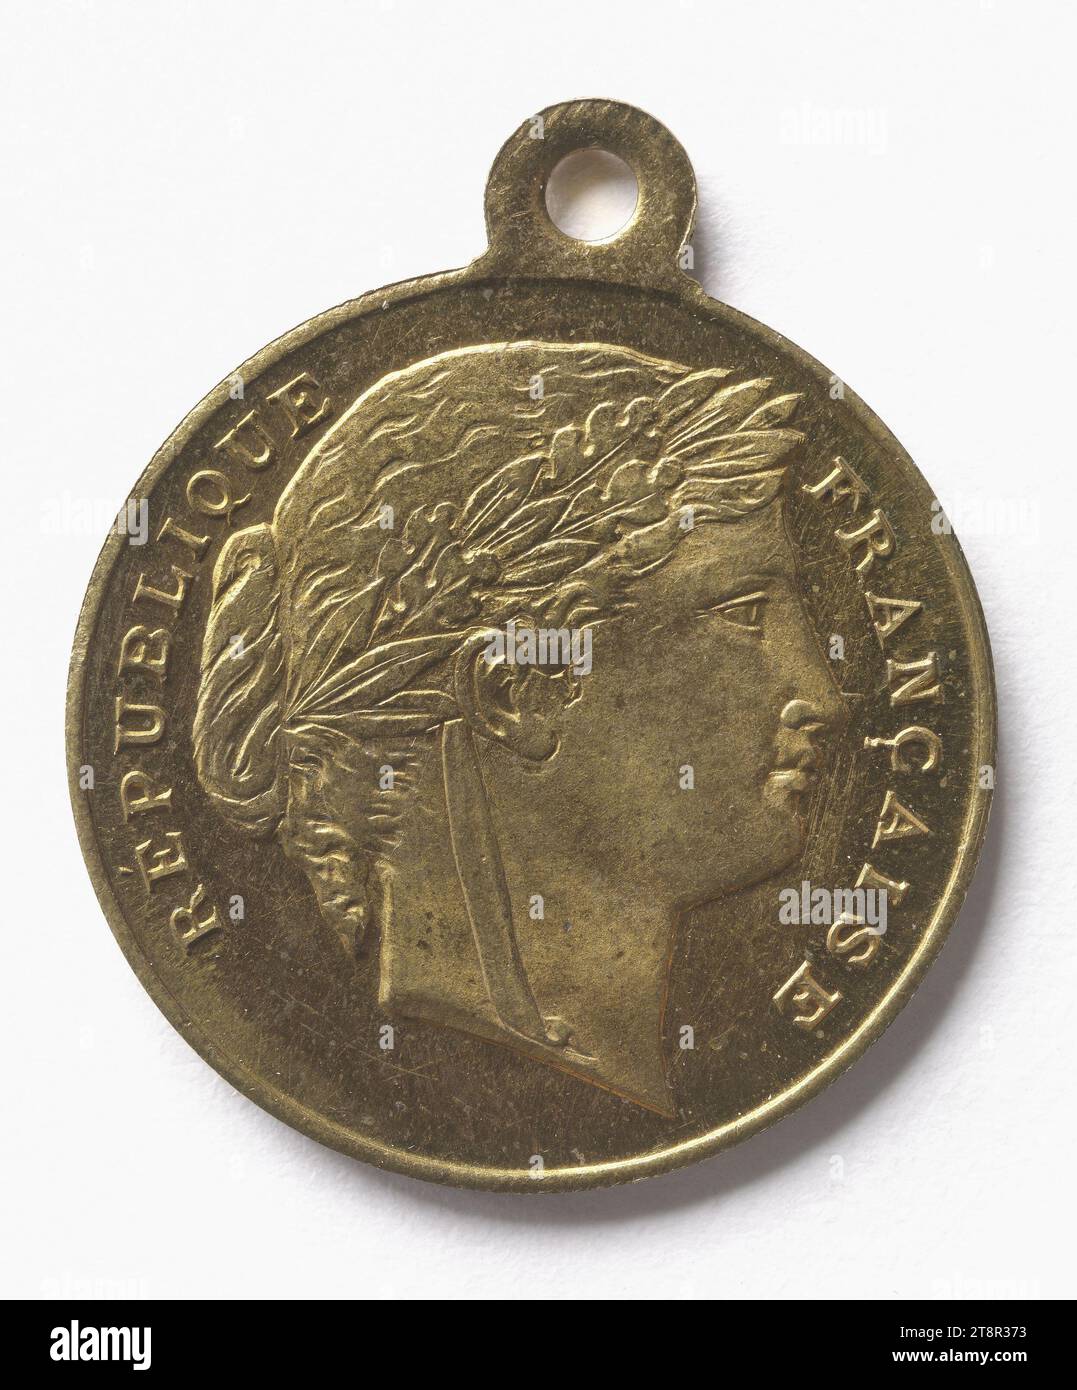 Musical contest during the inauguration of the railway of Isigny, July 3, 1881, Array, Numismatic, Medal, Copper, Gilt = gilding, Dimensions - Work: Diameter: 2.3 cm, Weight (type size): 3.76 g Stock Photo